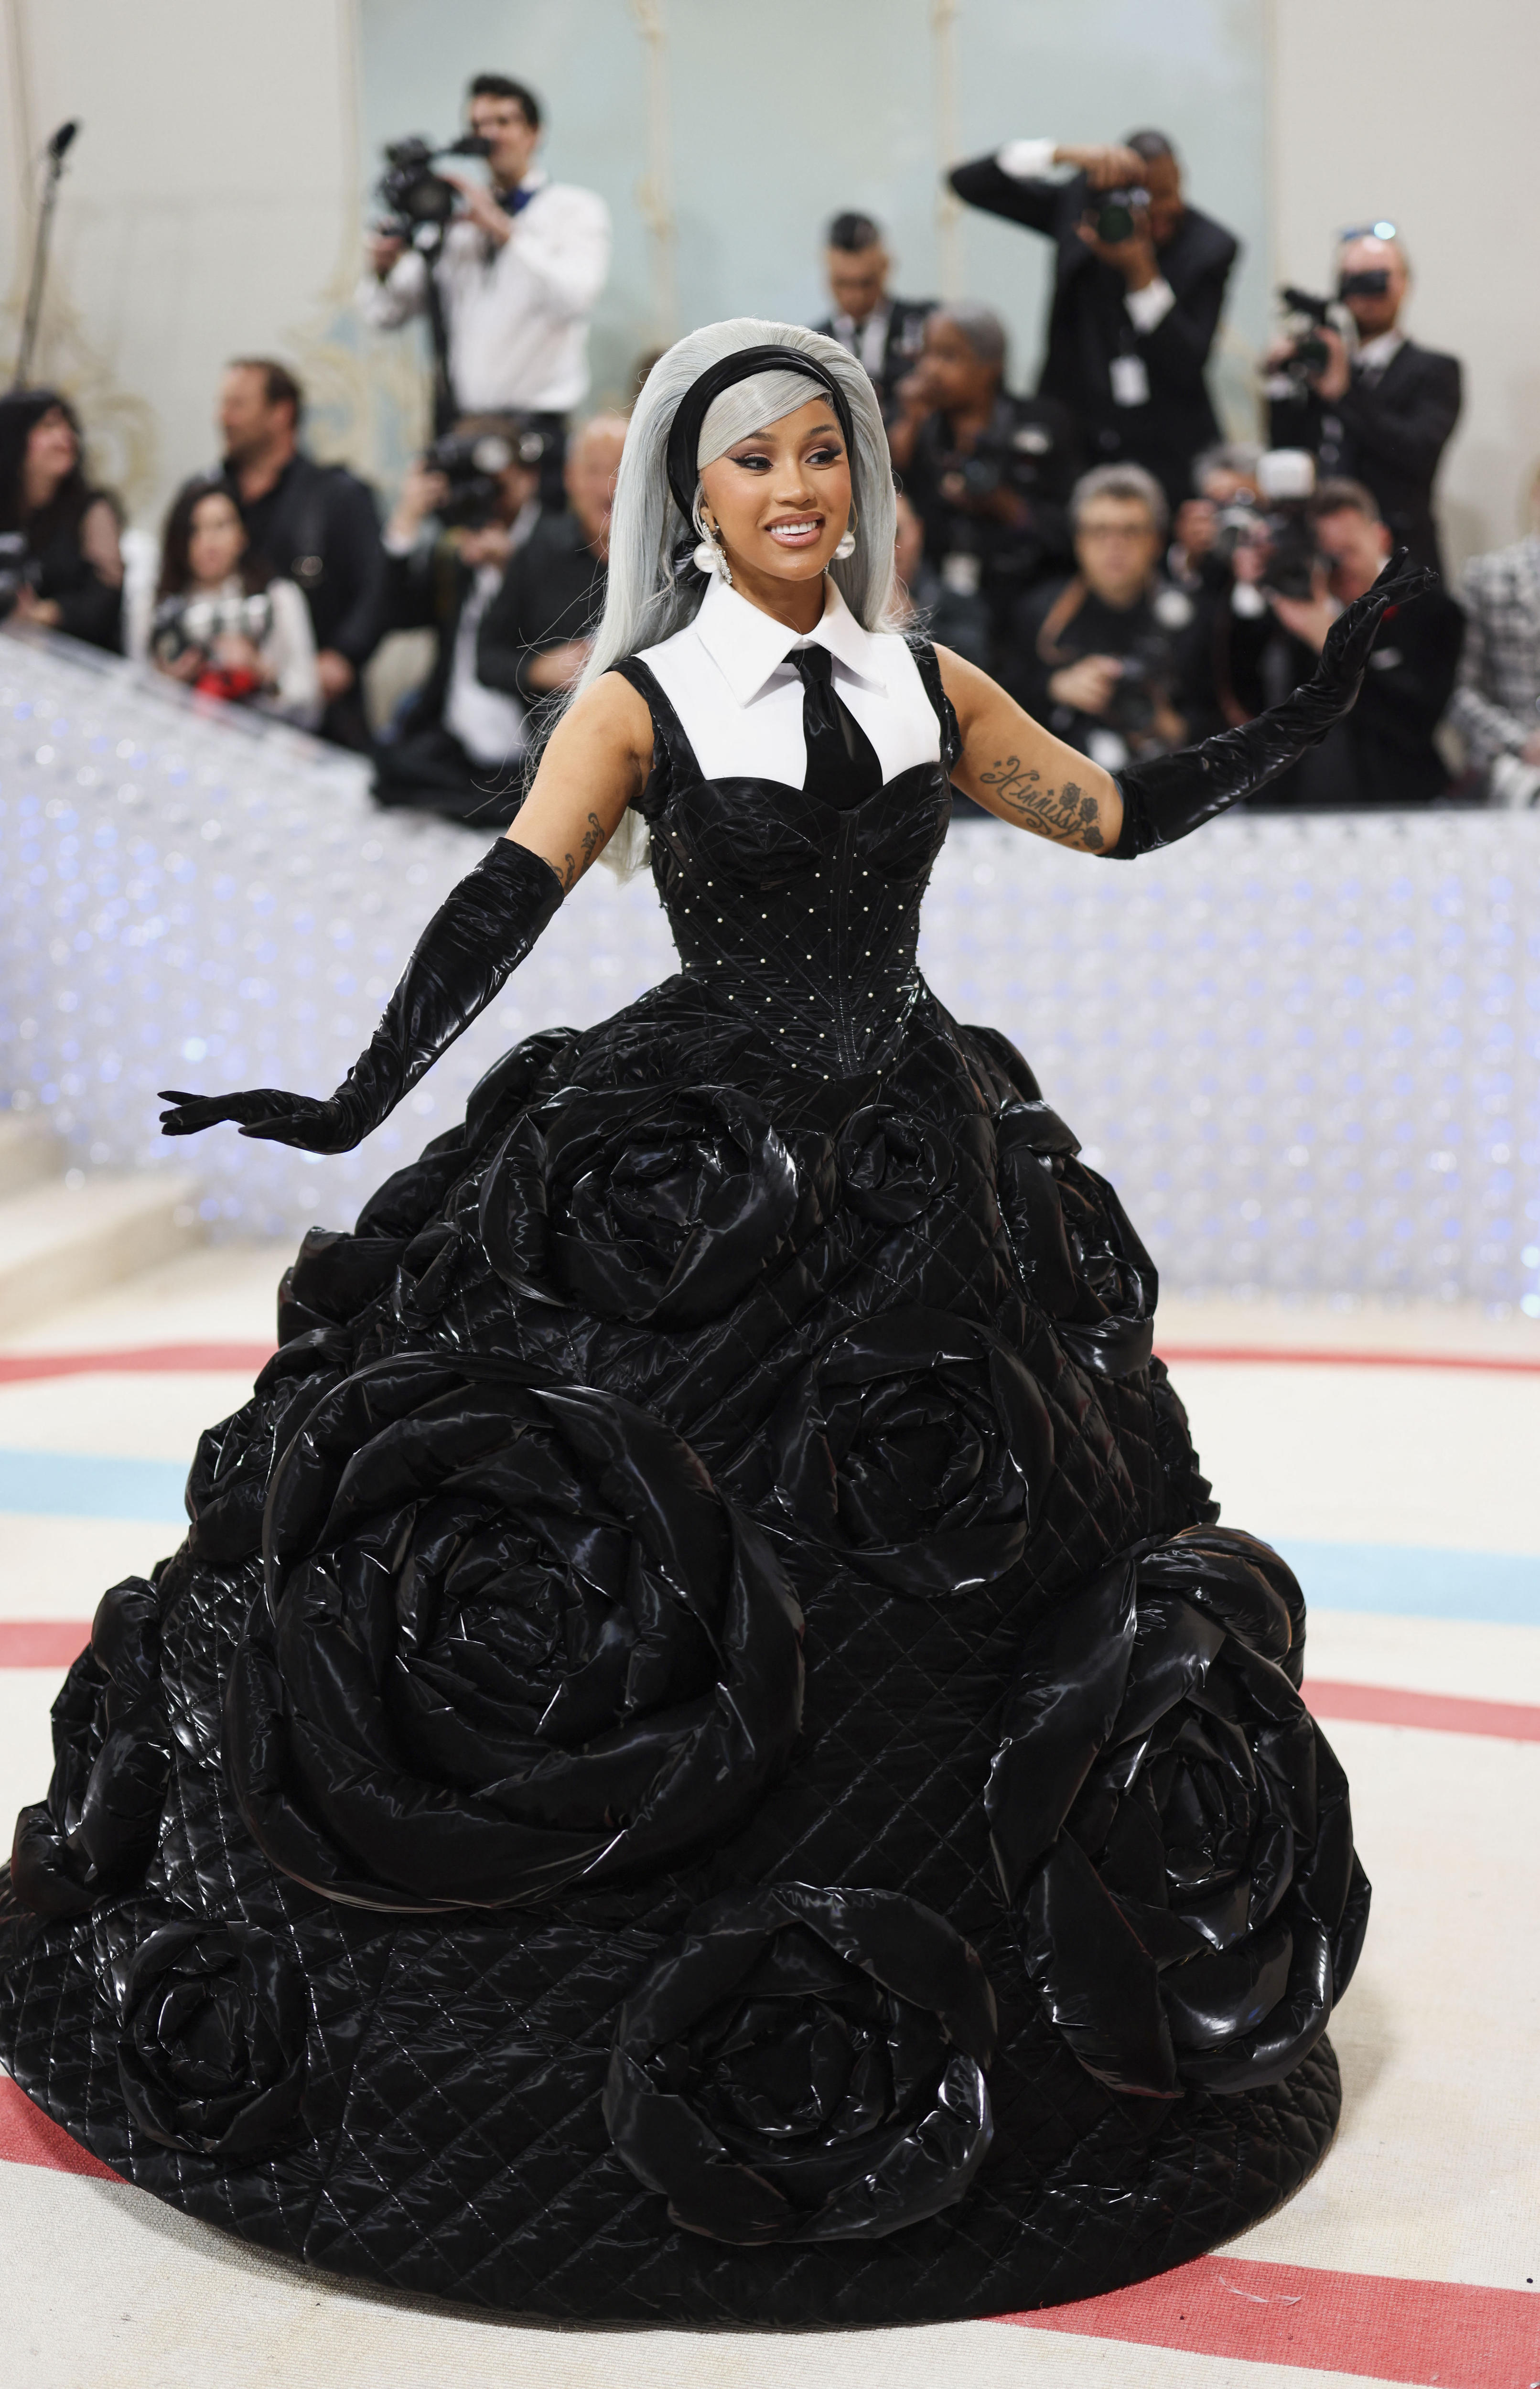 Cardi B in a black full-skirted cushion-gown with big plastic roses and a white sleeveless shirt with a black tie and grey wig